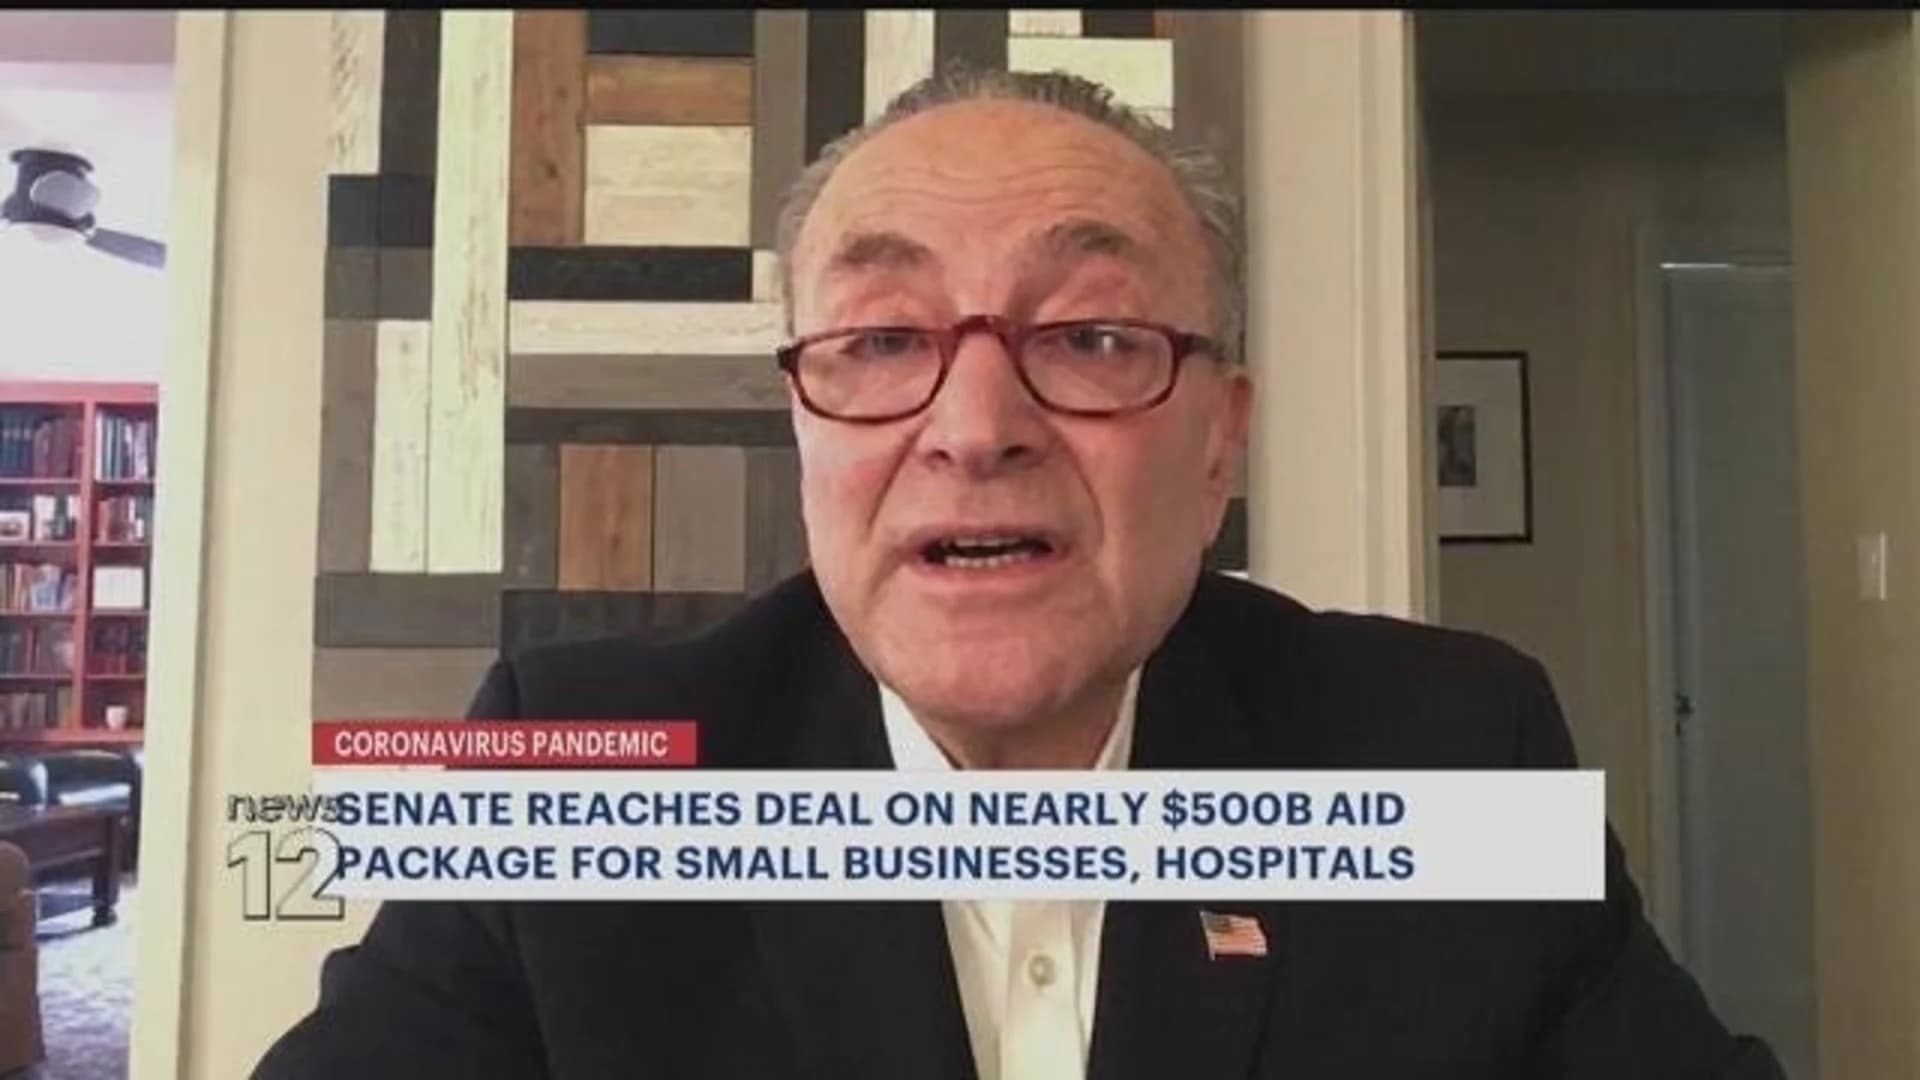 Senate approves $483B virus aid deal, sends it to House